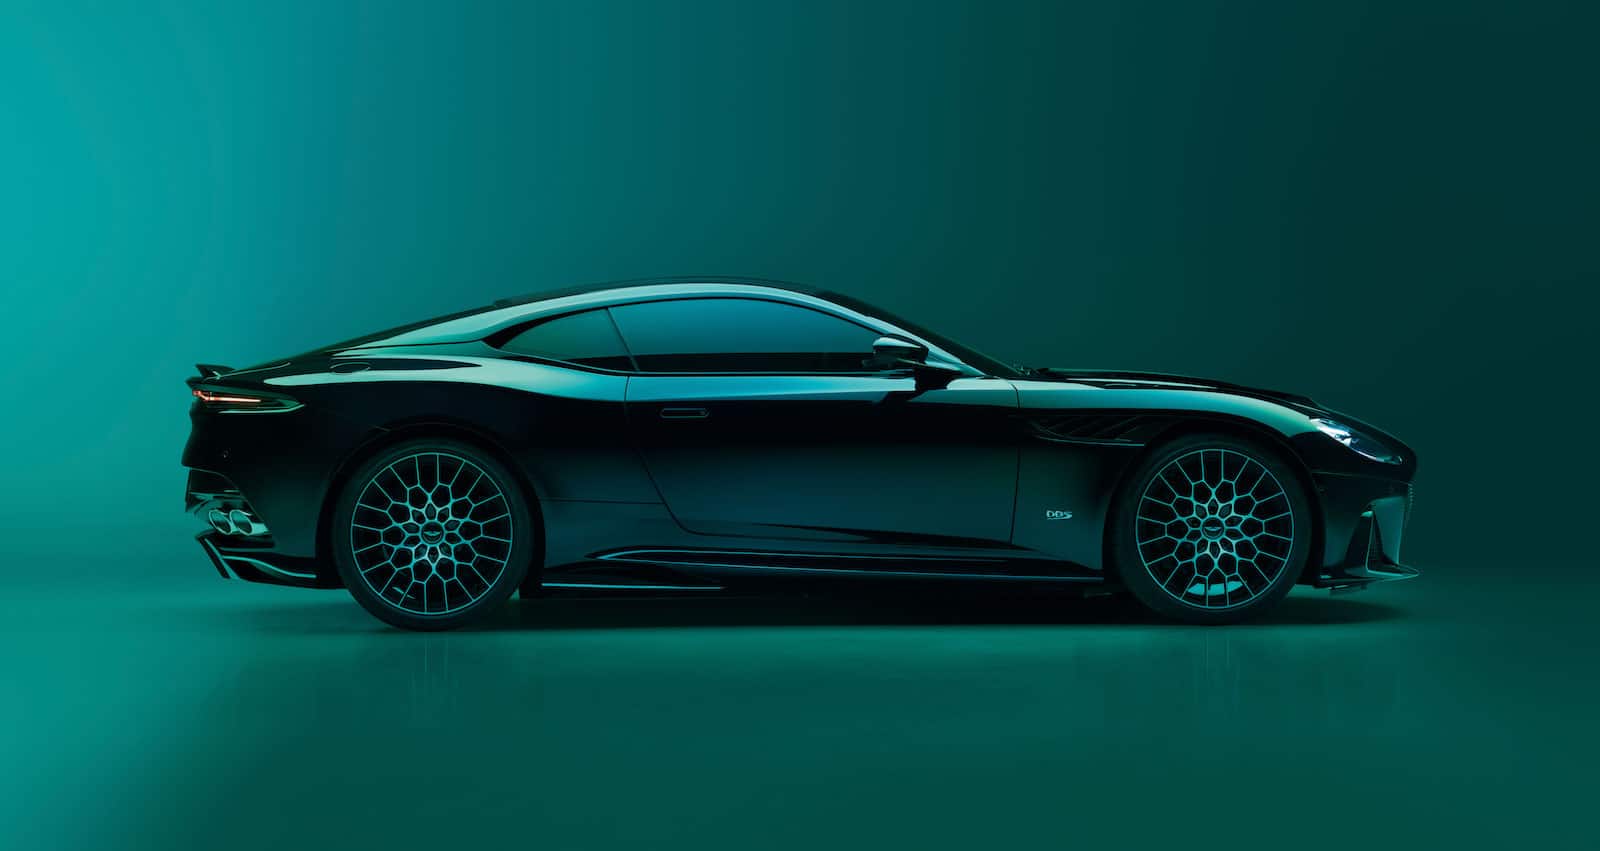 Aston Martin's Penultimate DBS: the 770 Ultimate